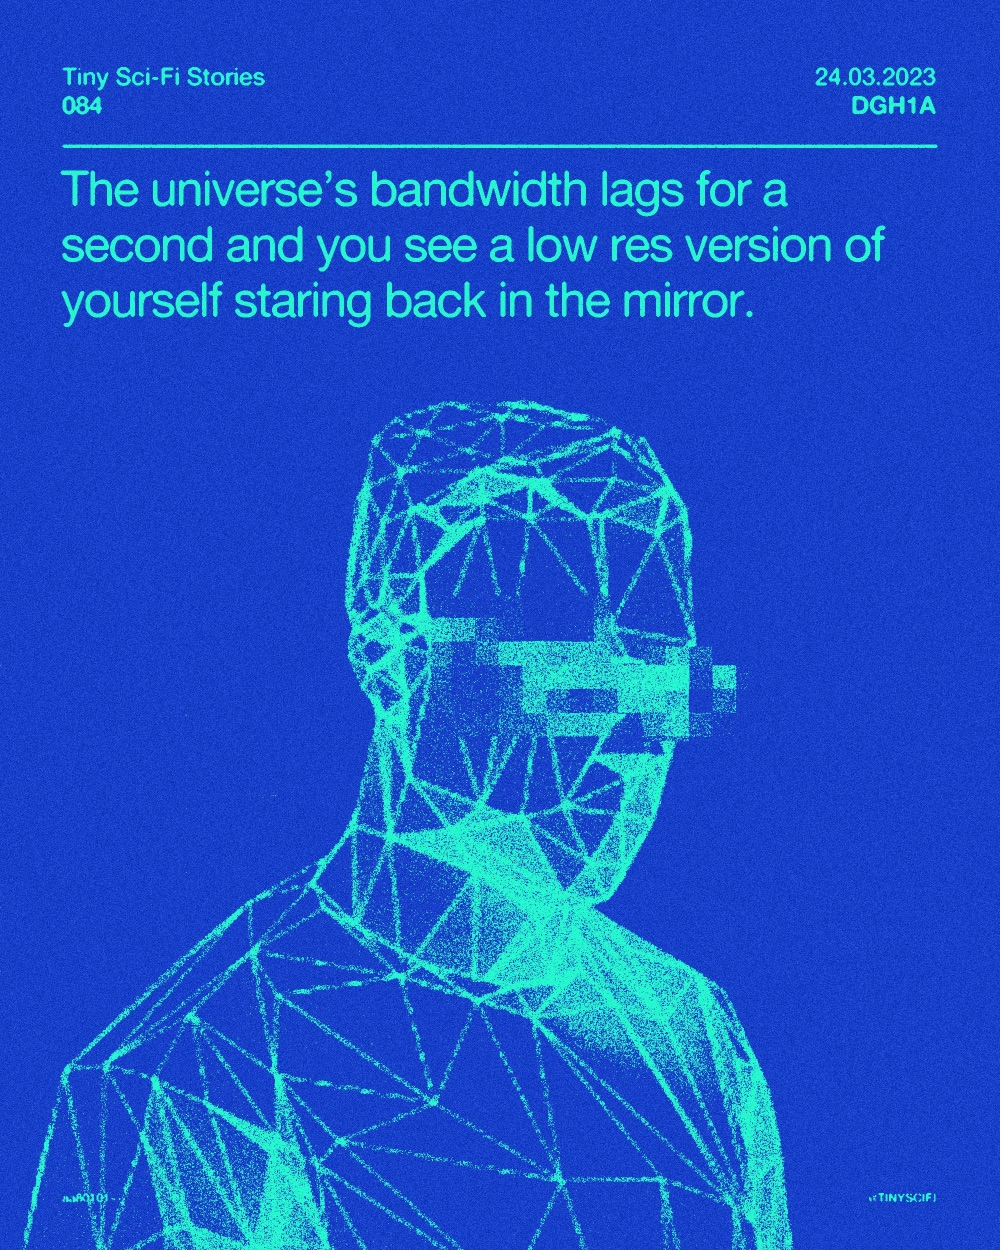 The universe's bandwidth lags for a second and you see a low res version of yourself staring back in the mirror.